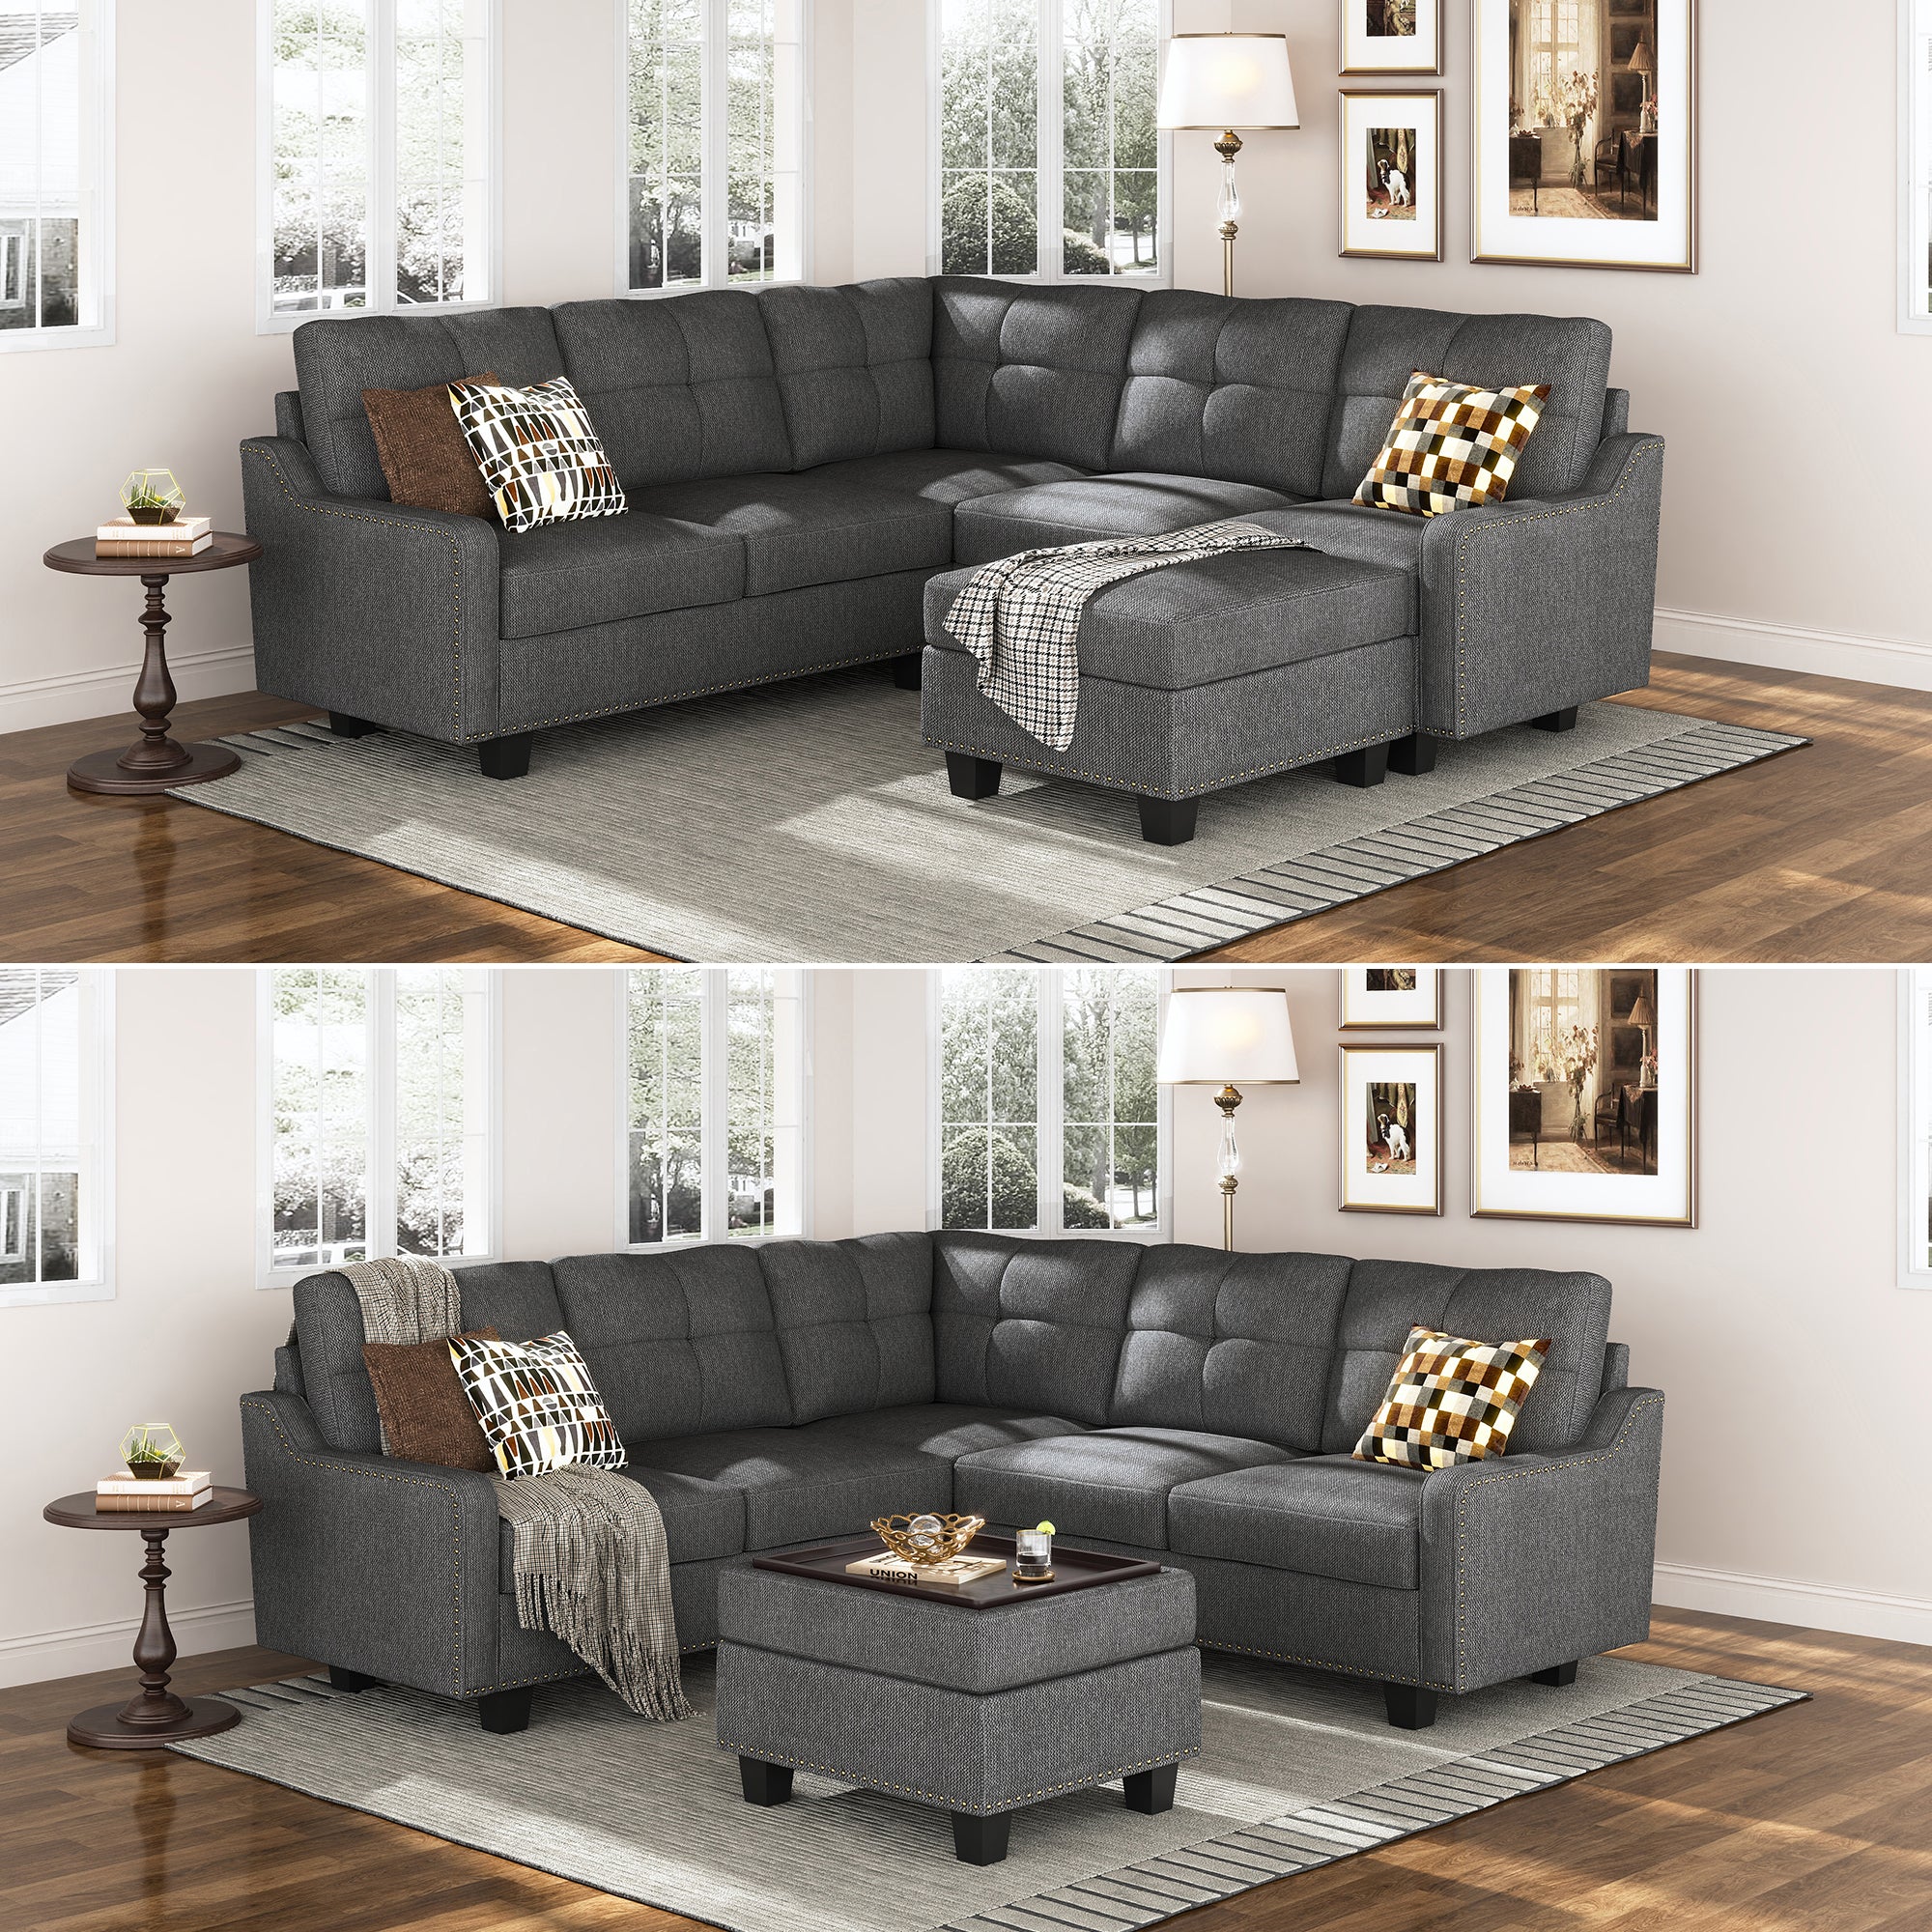 HONBAY Polyester Sectional Corner Sofa with Reversible Lid Storage Ottoman